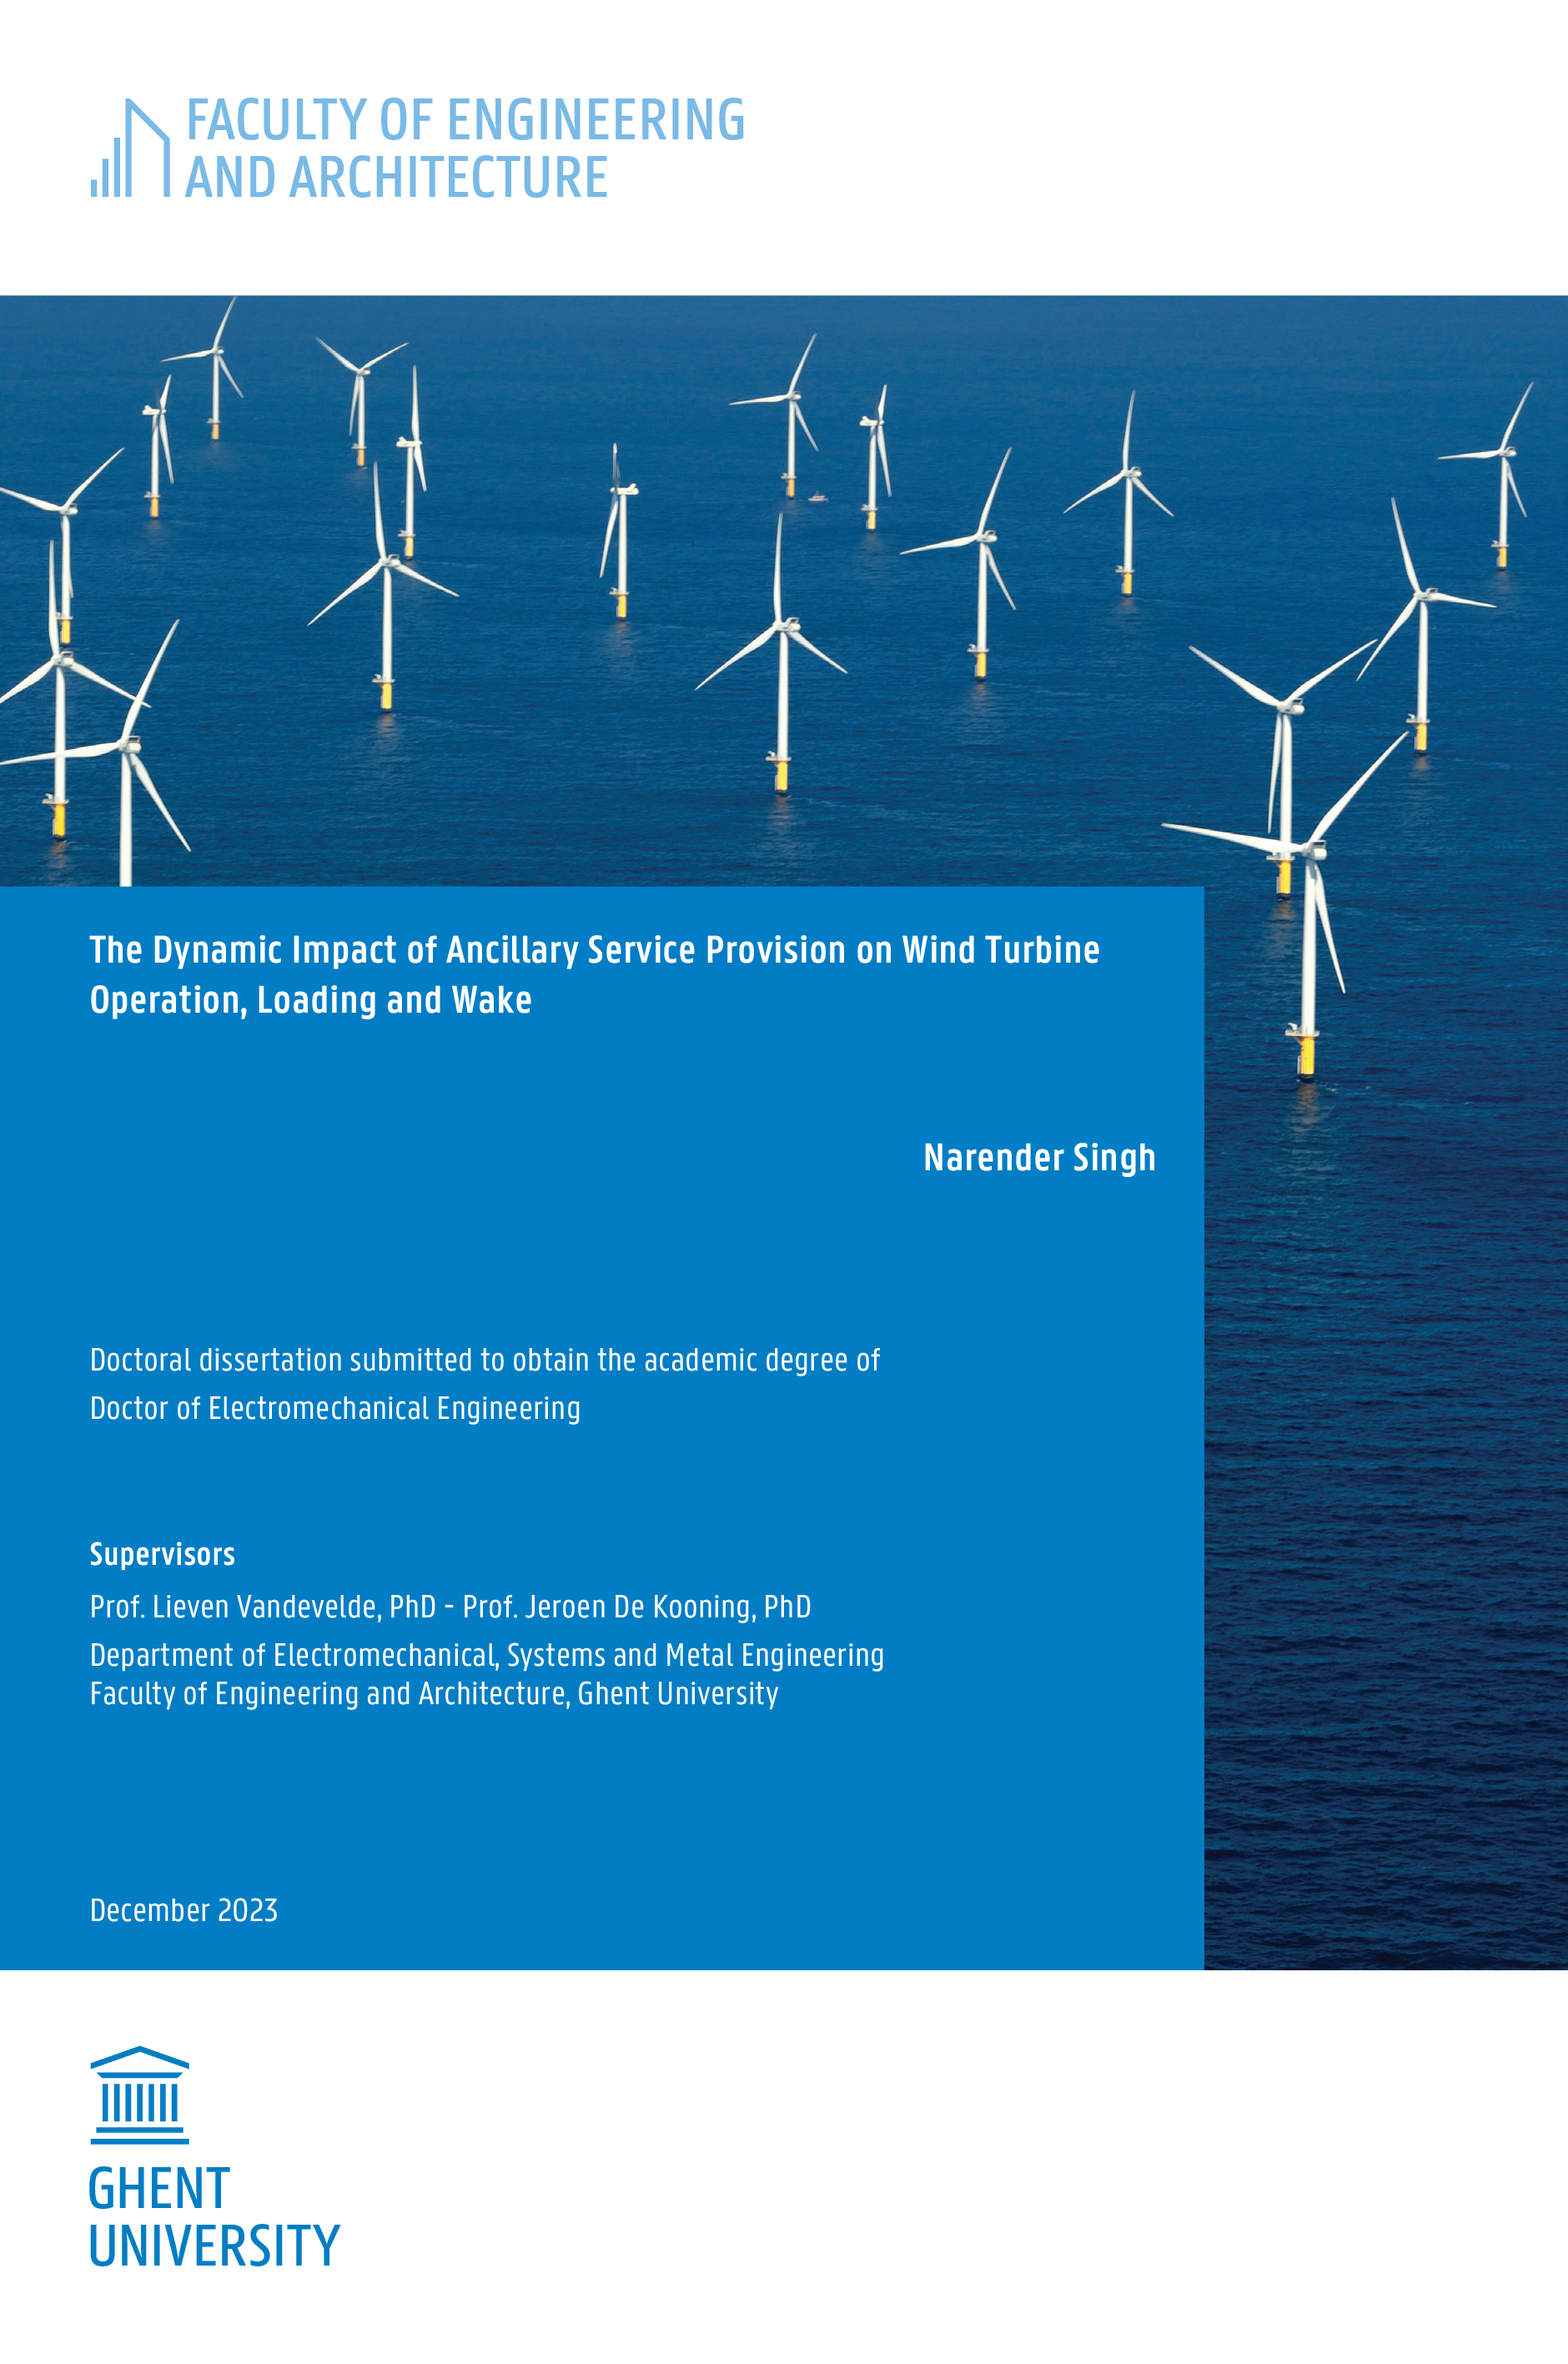 The Dynamic Impact of Ancillary Service Provision on Wind Turbine Operation, Loading and Wake